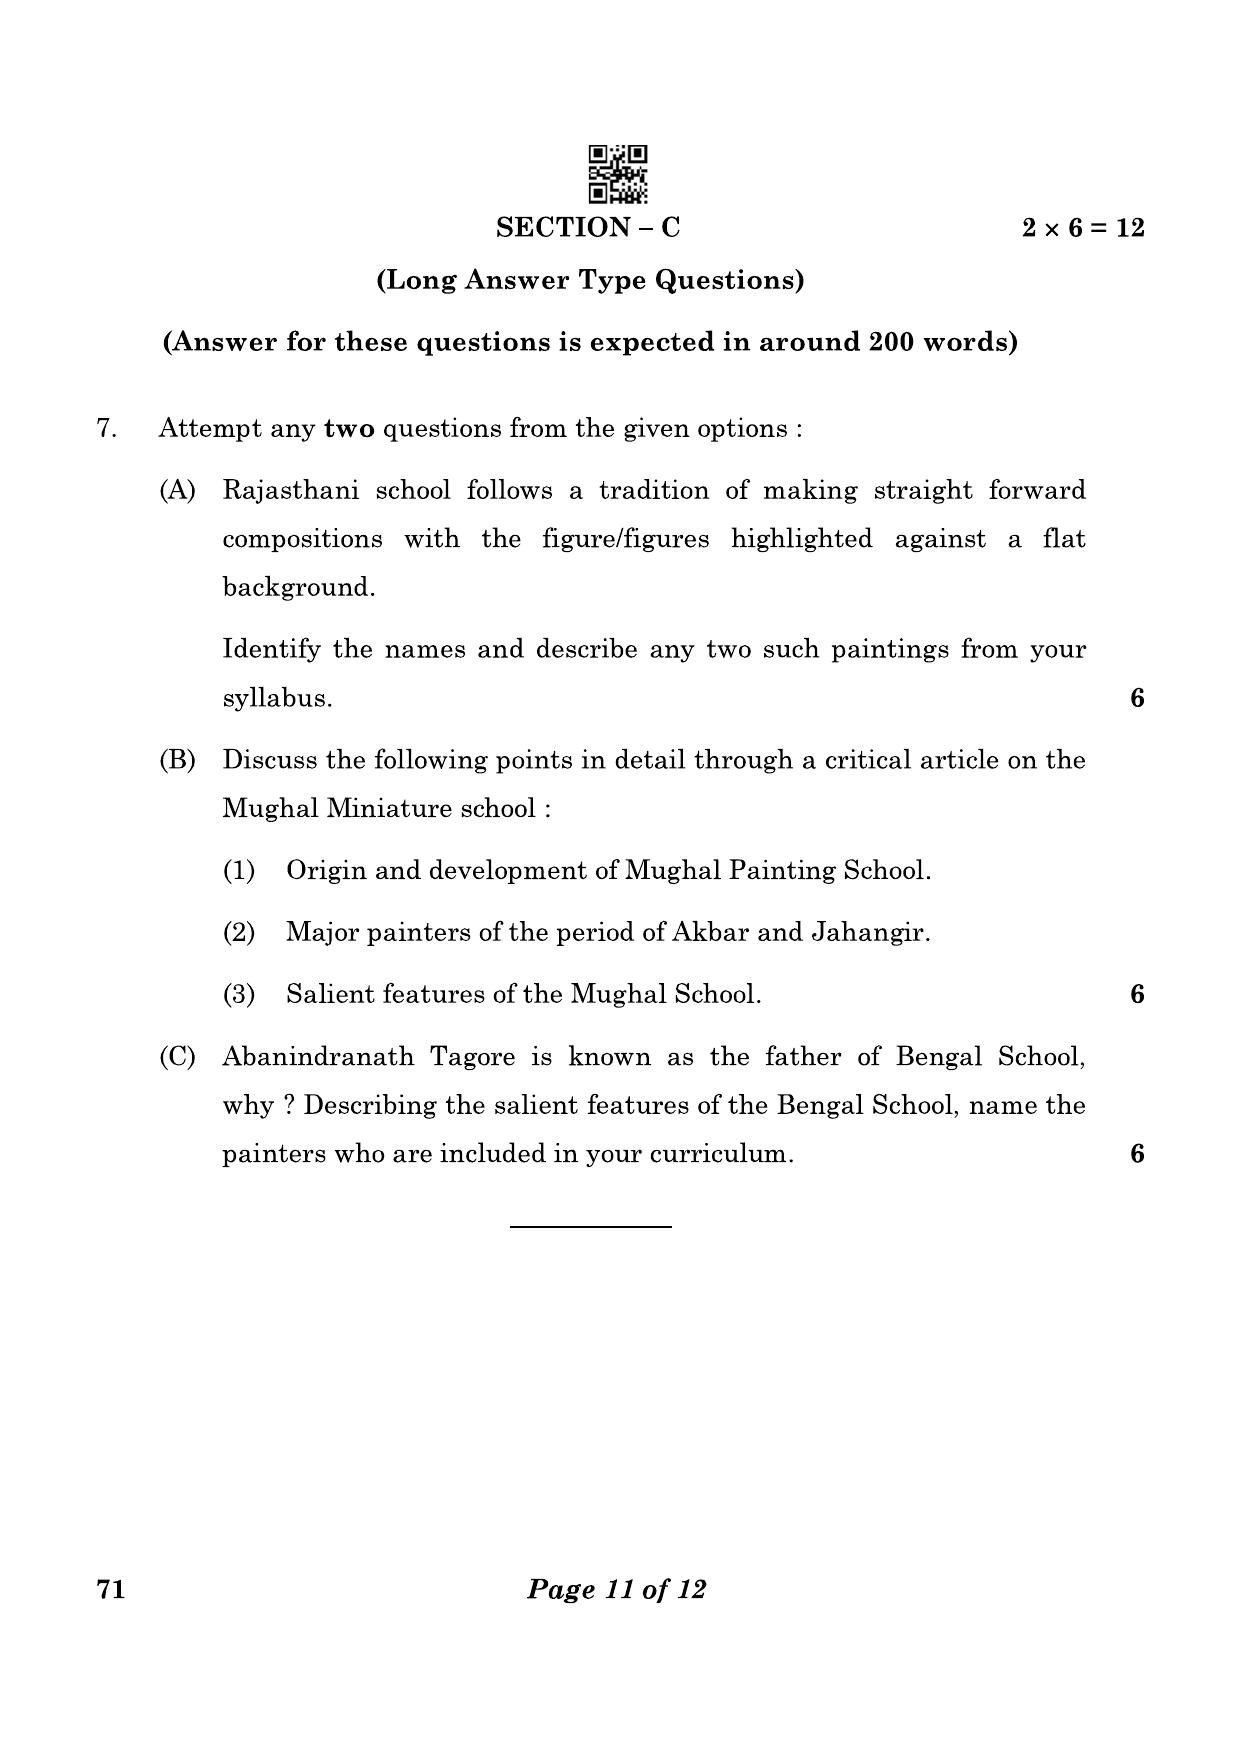 CBSE Class 12 71_Painting 2023 Question Paper - Page 11